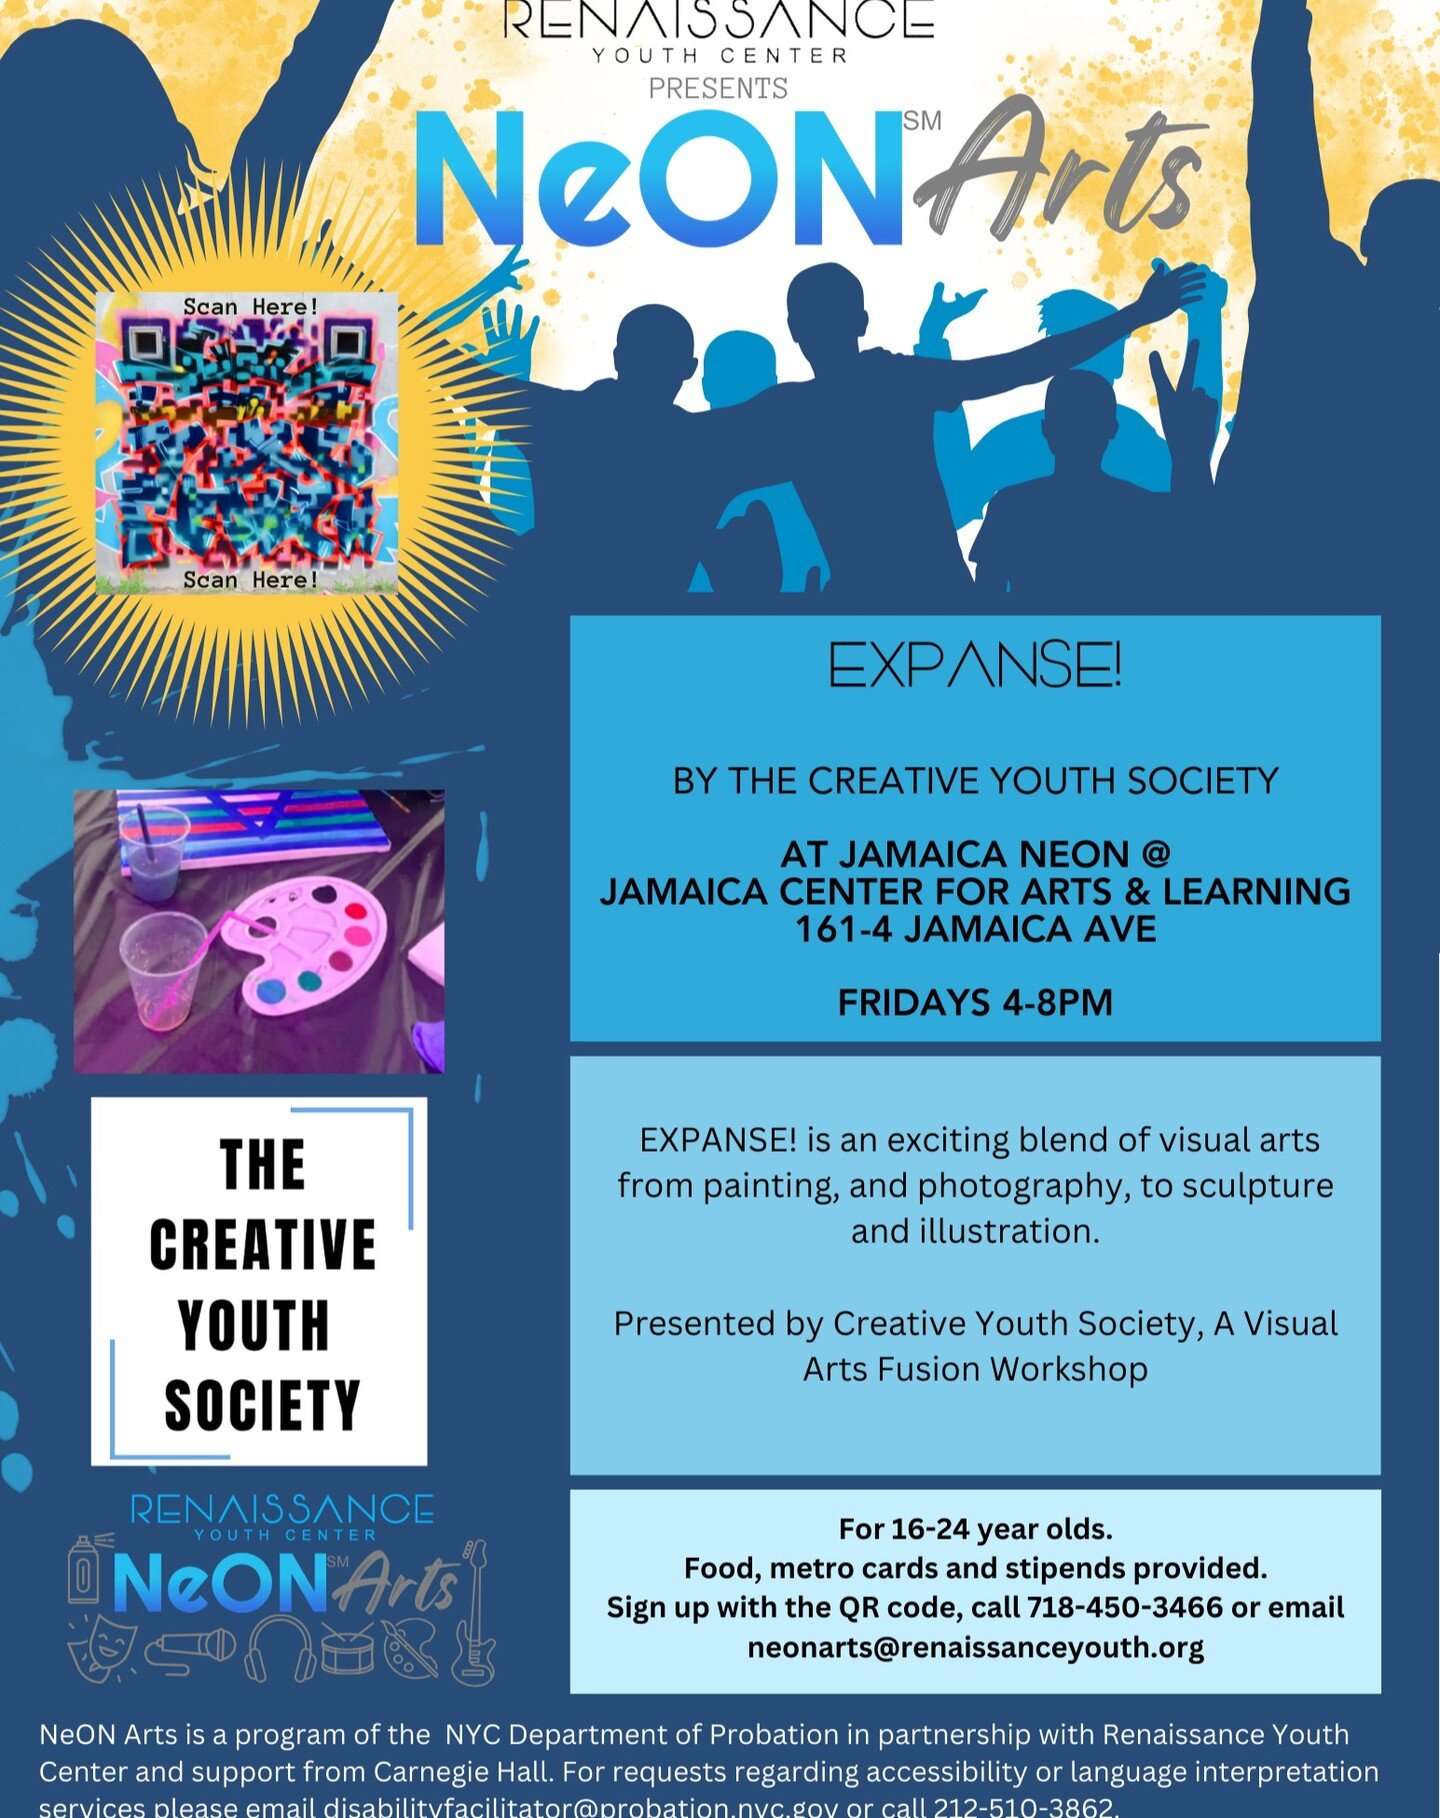 NeON Arts Classes are filling up fast! Visit the QR code or visit https://renaissanceyouth.org/ryc-neon to learn more about these NeON Arts programs taking place right in your own community. 7 locations in all 5 boroughs. We provide food, metrocrads,